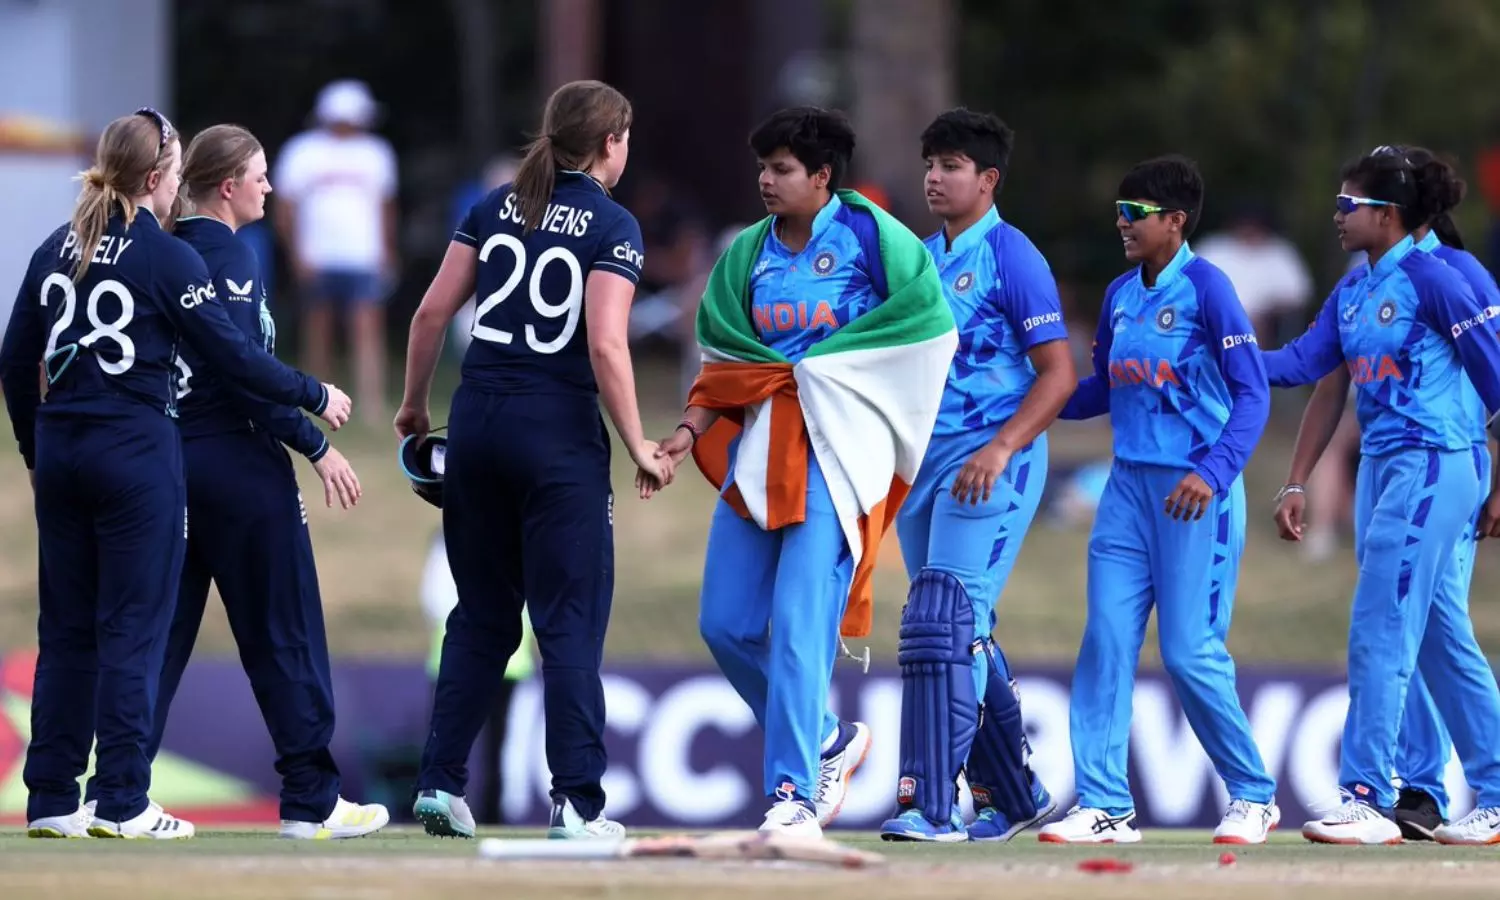 Indian women's team created history by winning the Under-19 World Cup 